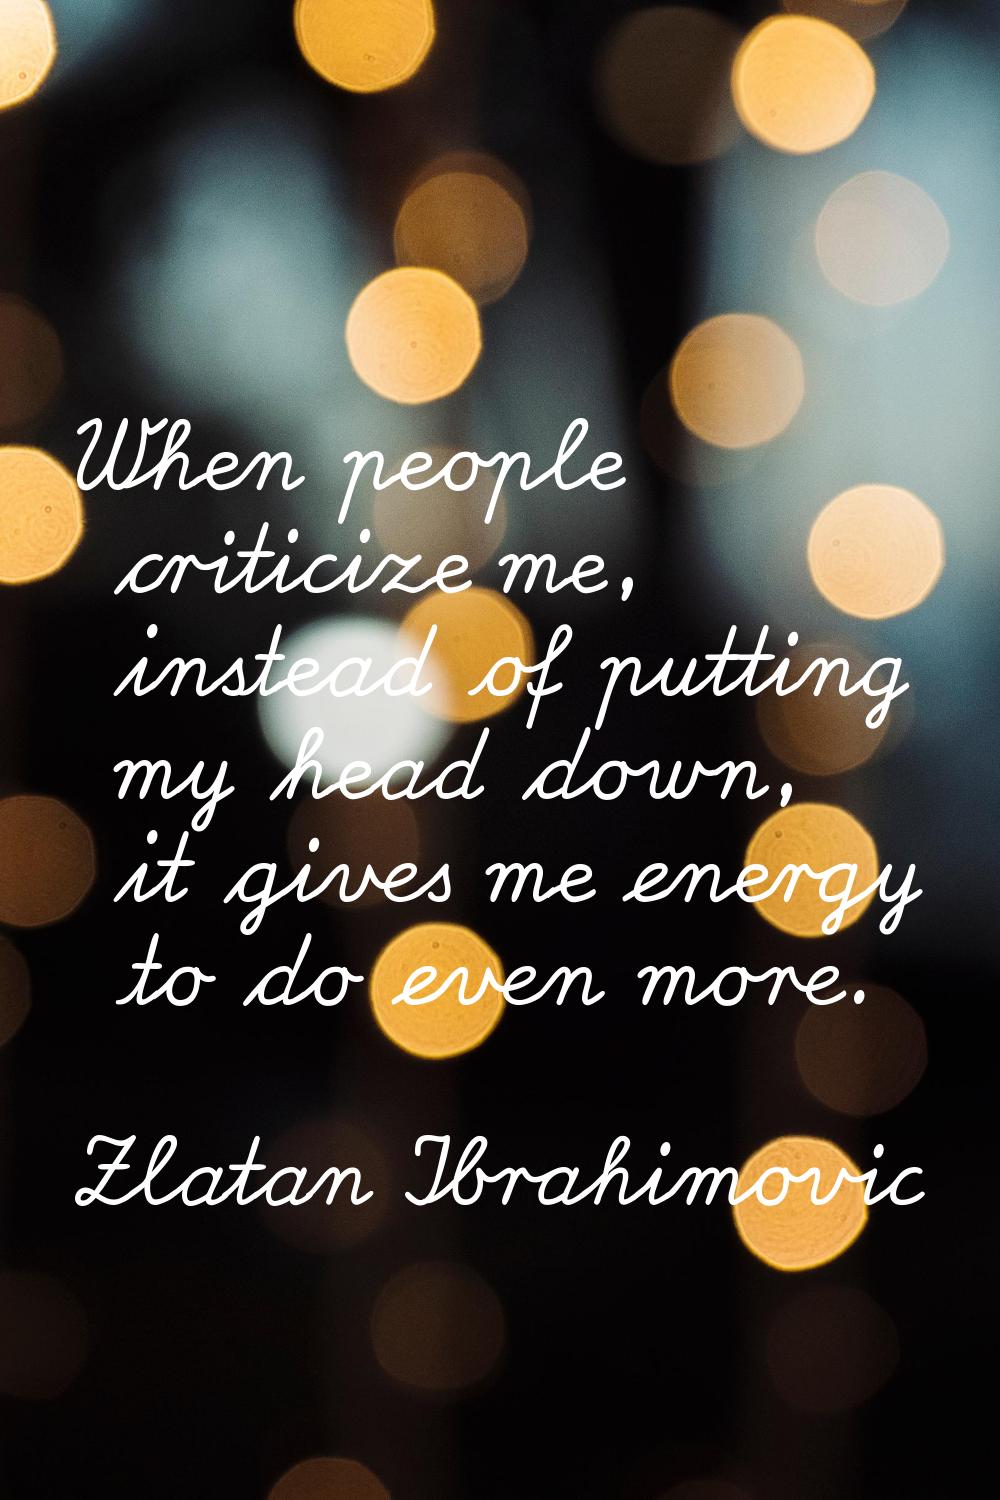 When people criticize me, instead of putting my head down, it gives me energy to do even more.